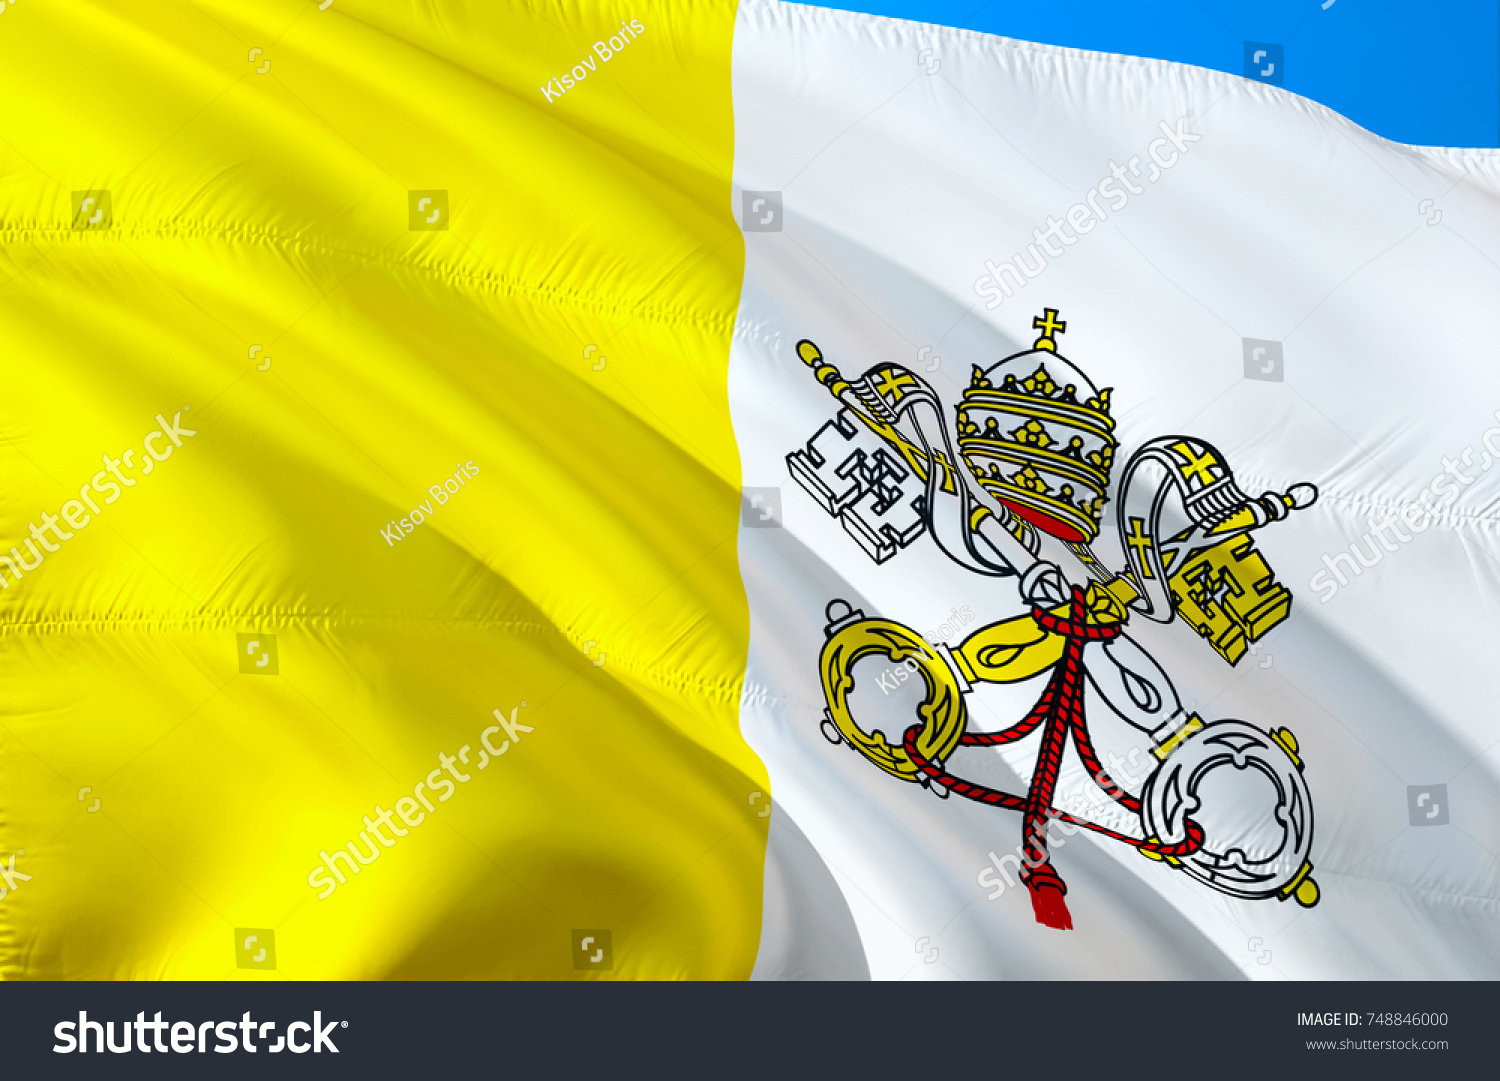 Royalty Stock Illustration Of Vatican City State Flag